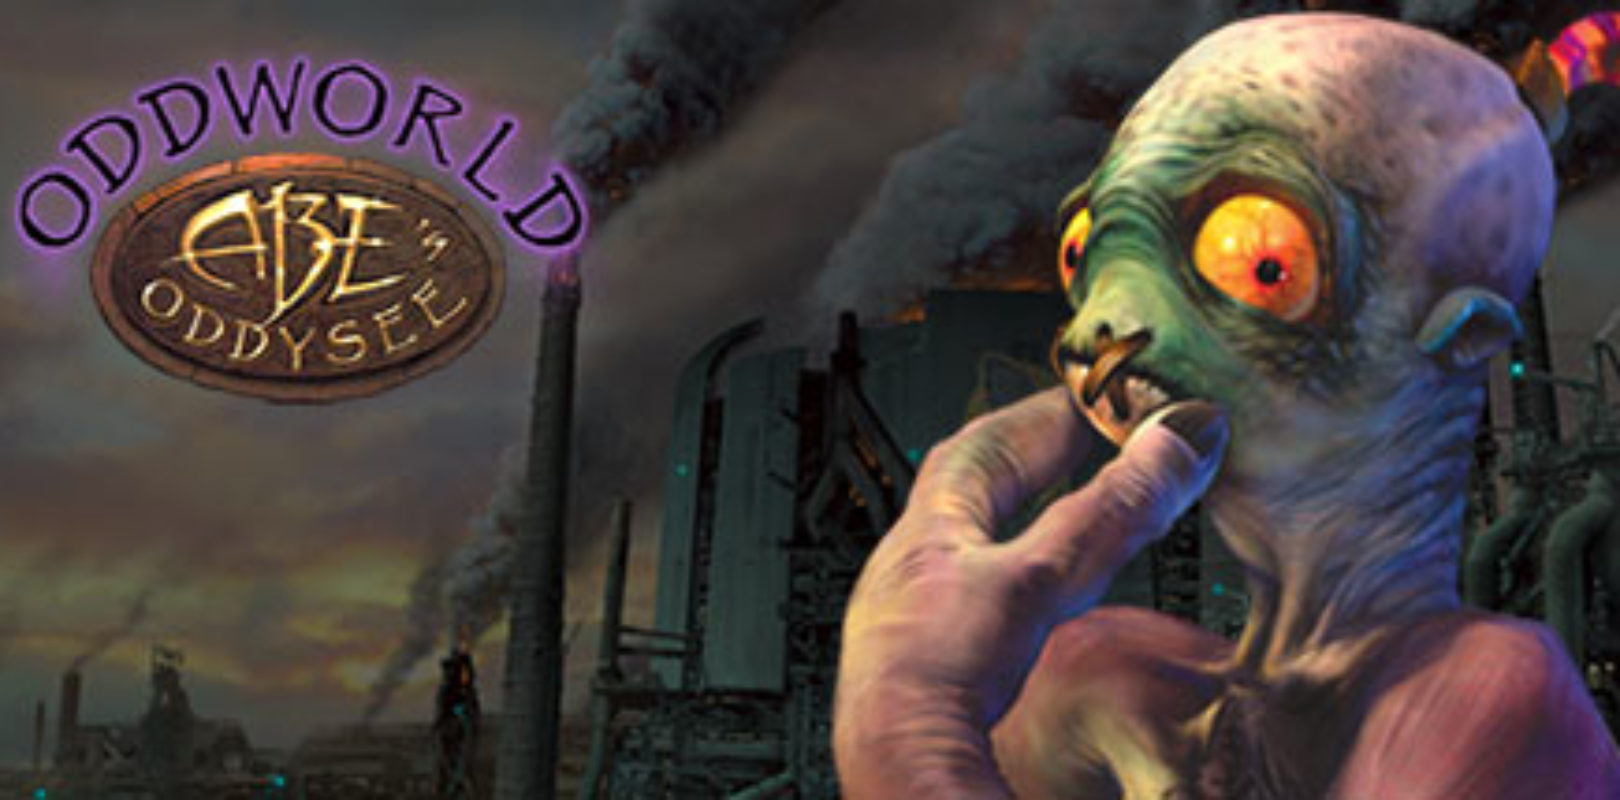 oddworld abe oddysee download for android